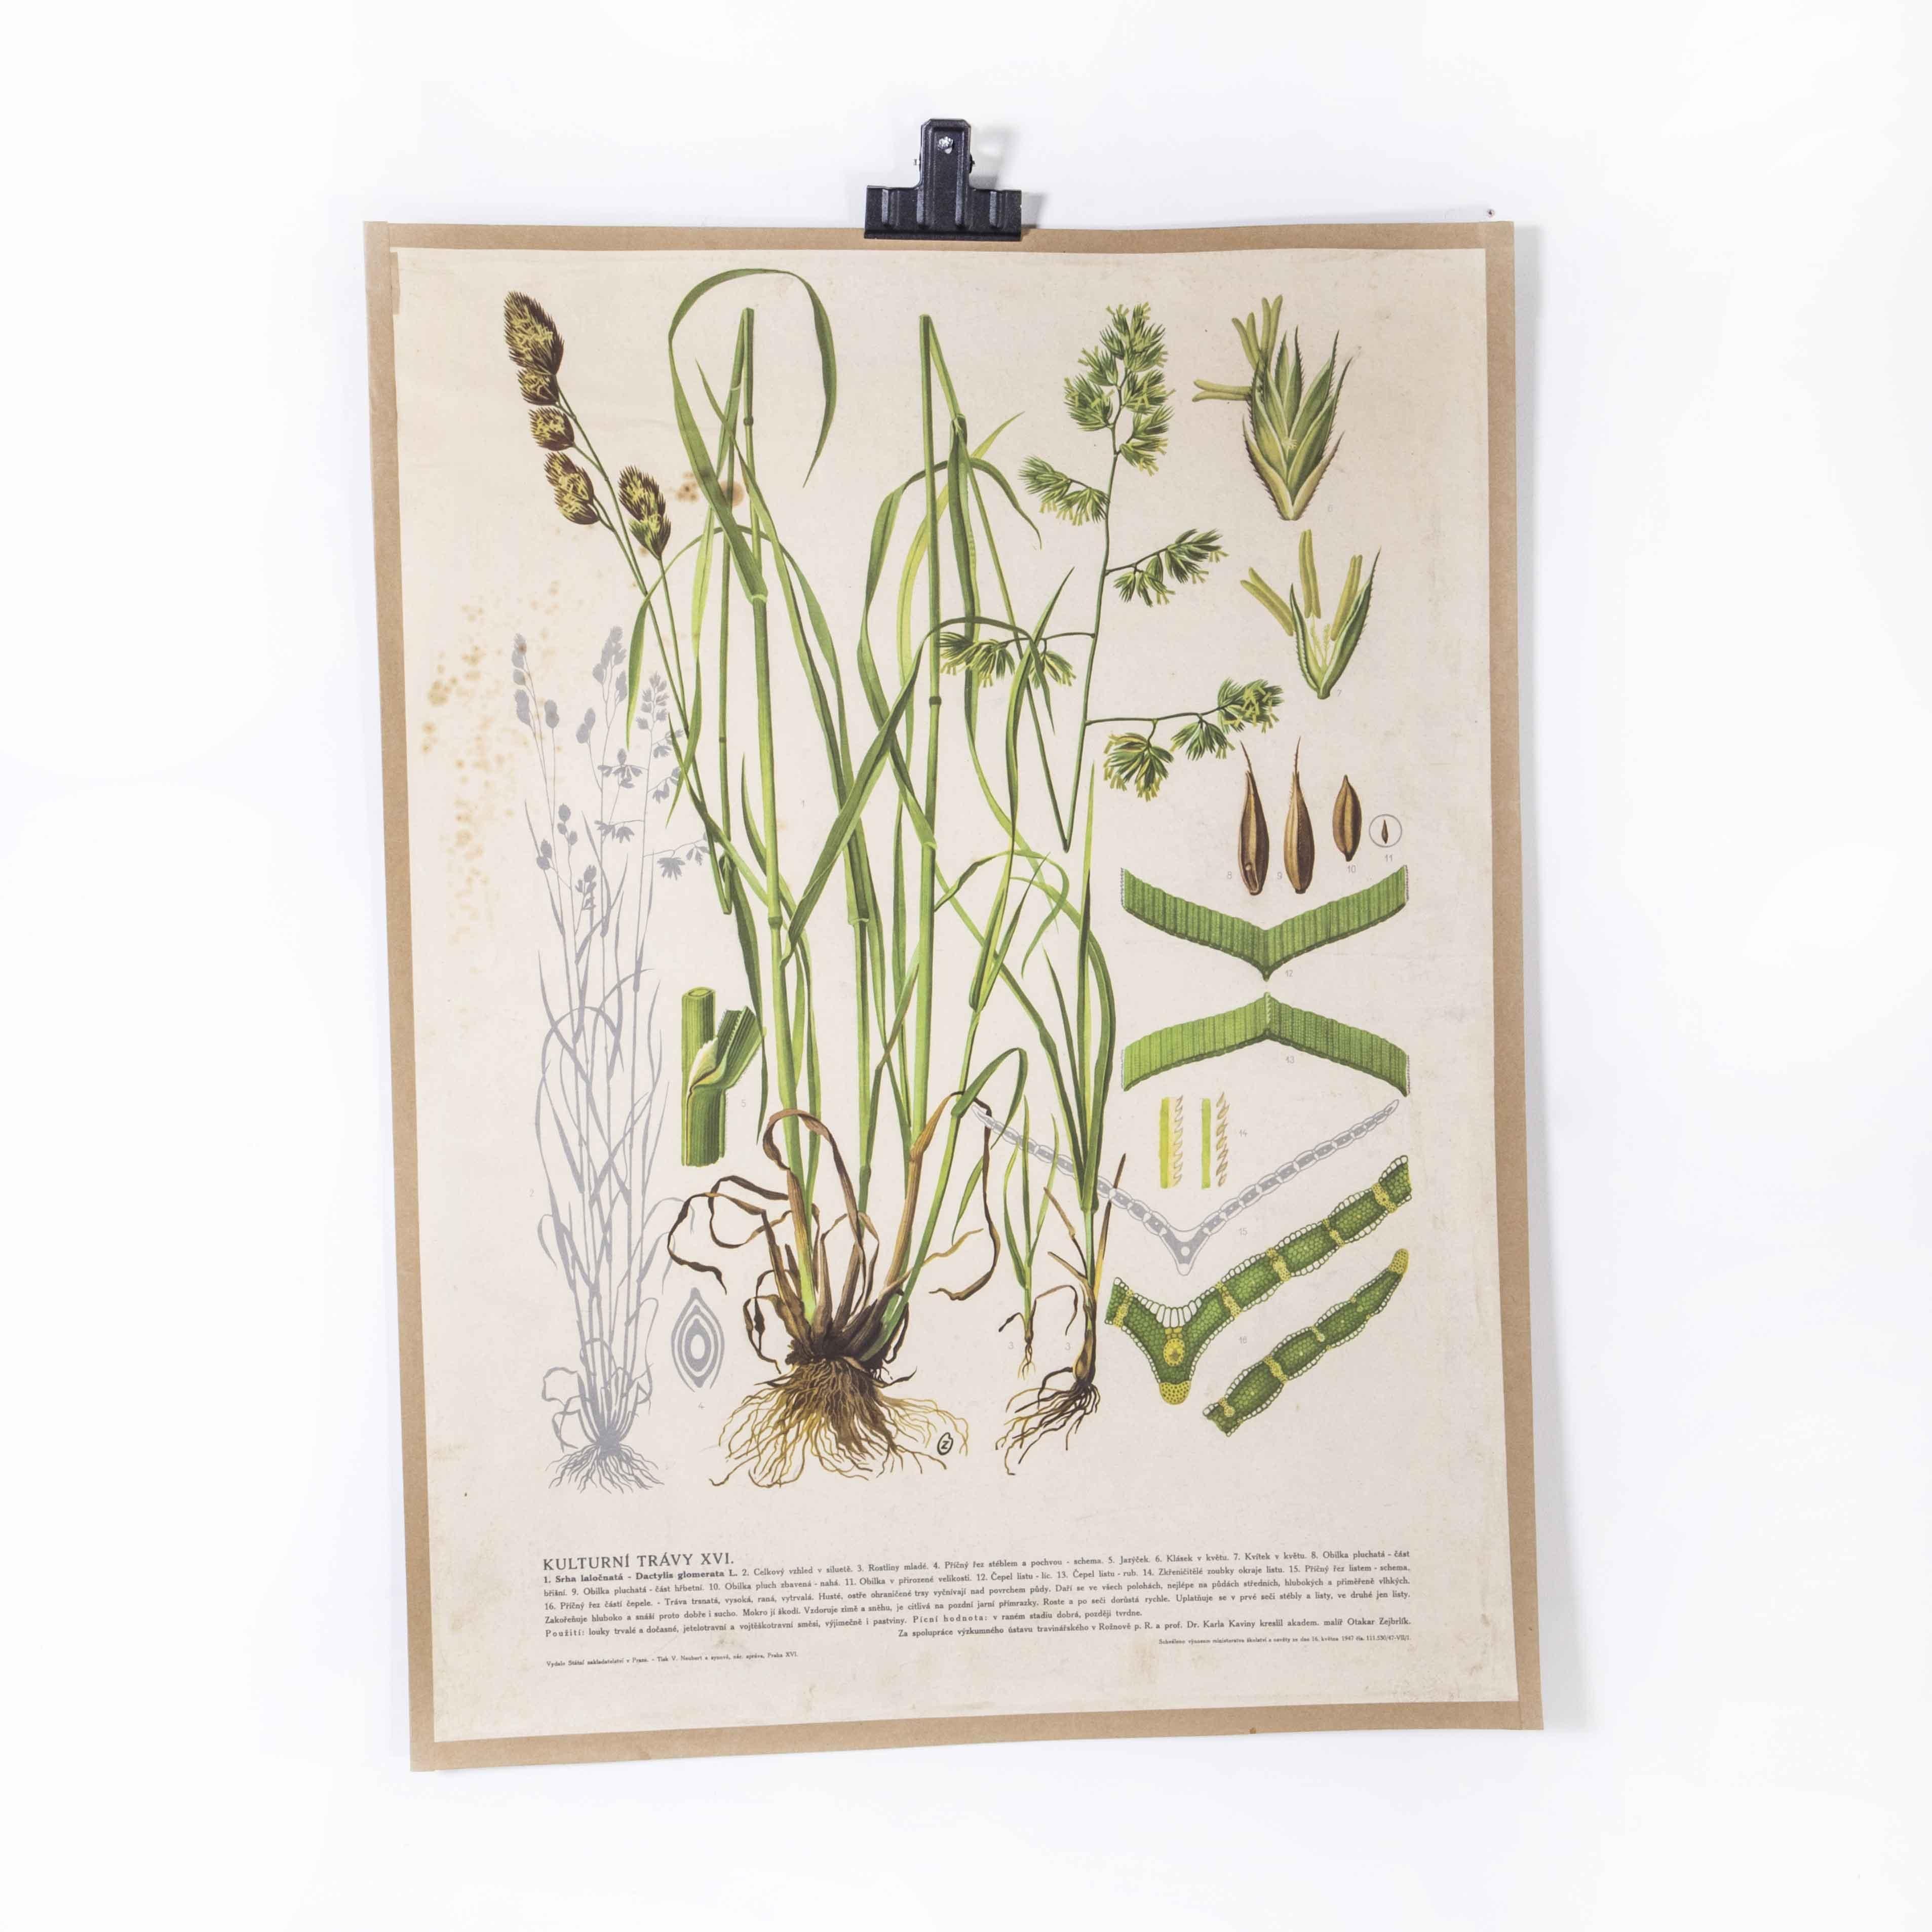 1940’s Plant growth educational poster
1940’s Plant growth educational poster. 20th Century Czechoslovakian educational chart. A rare and vintage wall chart from the Czech Republic illustrating the growth of a plant. This heavyweight paper chart is